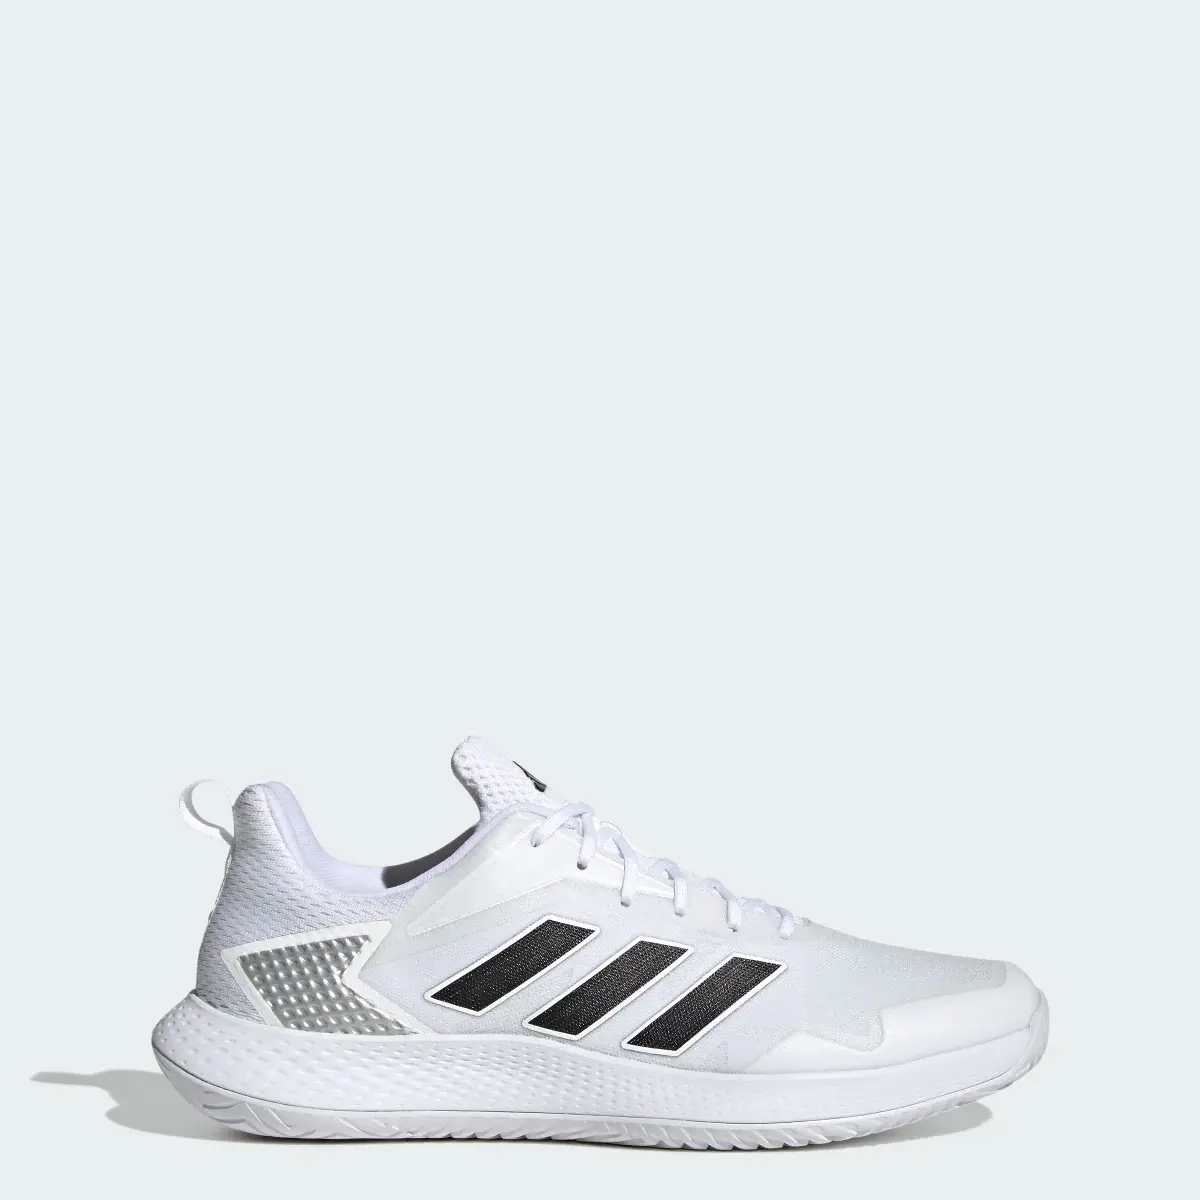 Adidas Defiant Speed Tennis Shoes. 1